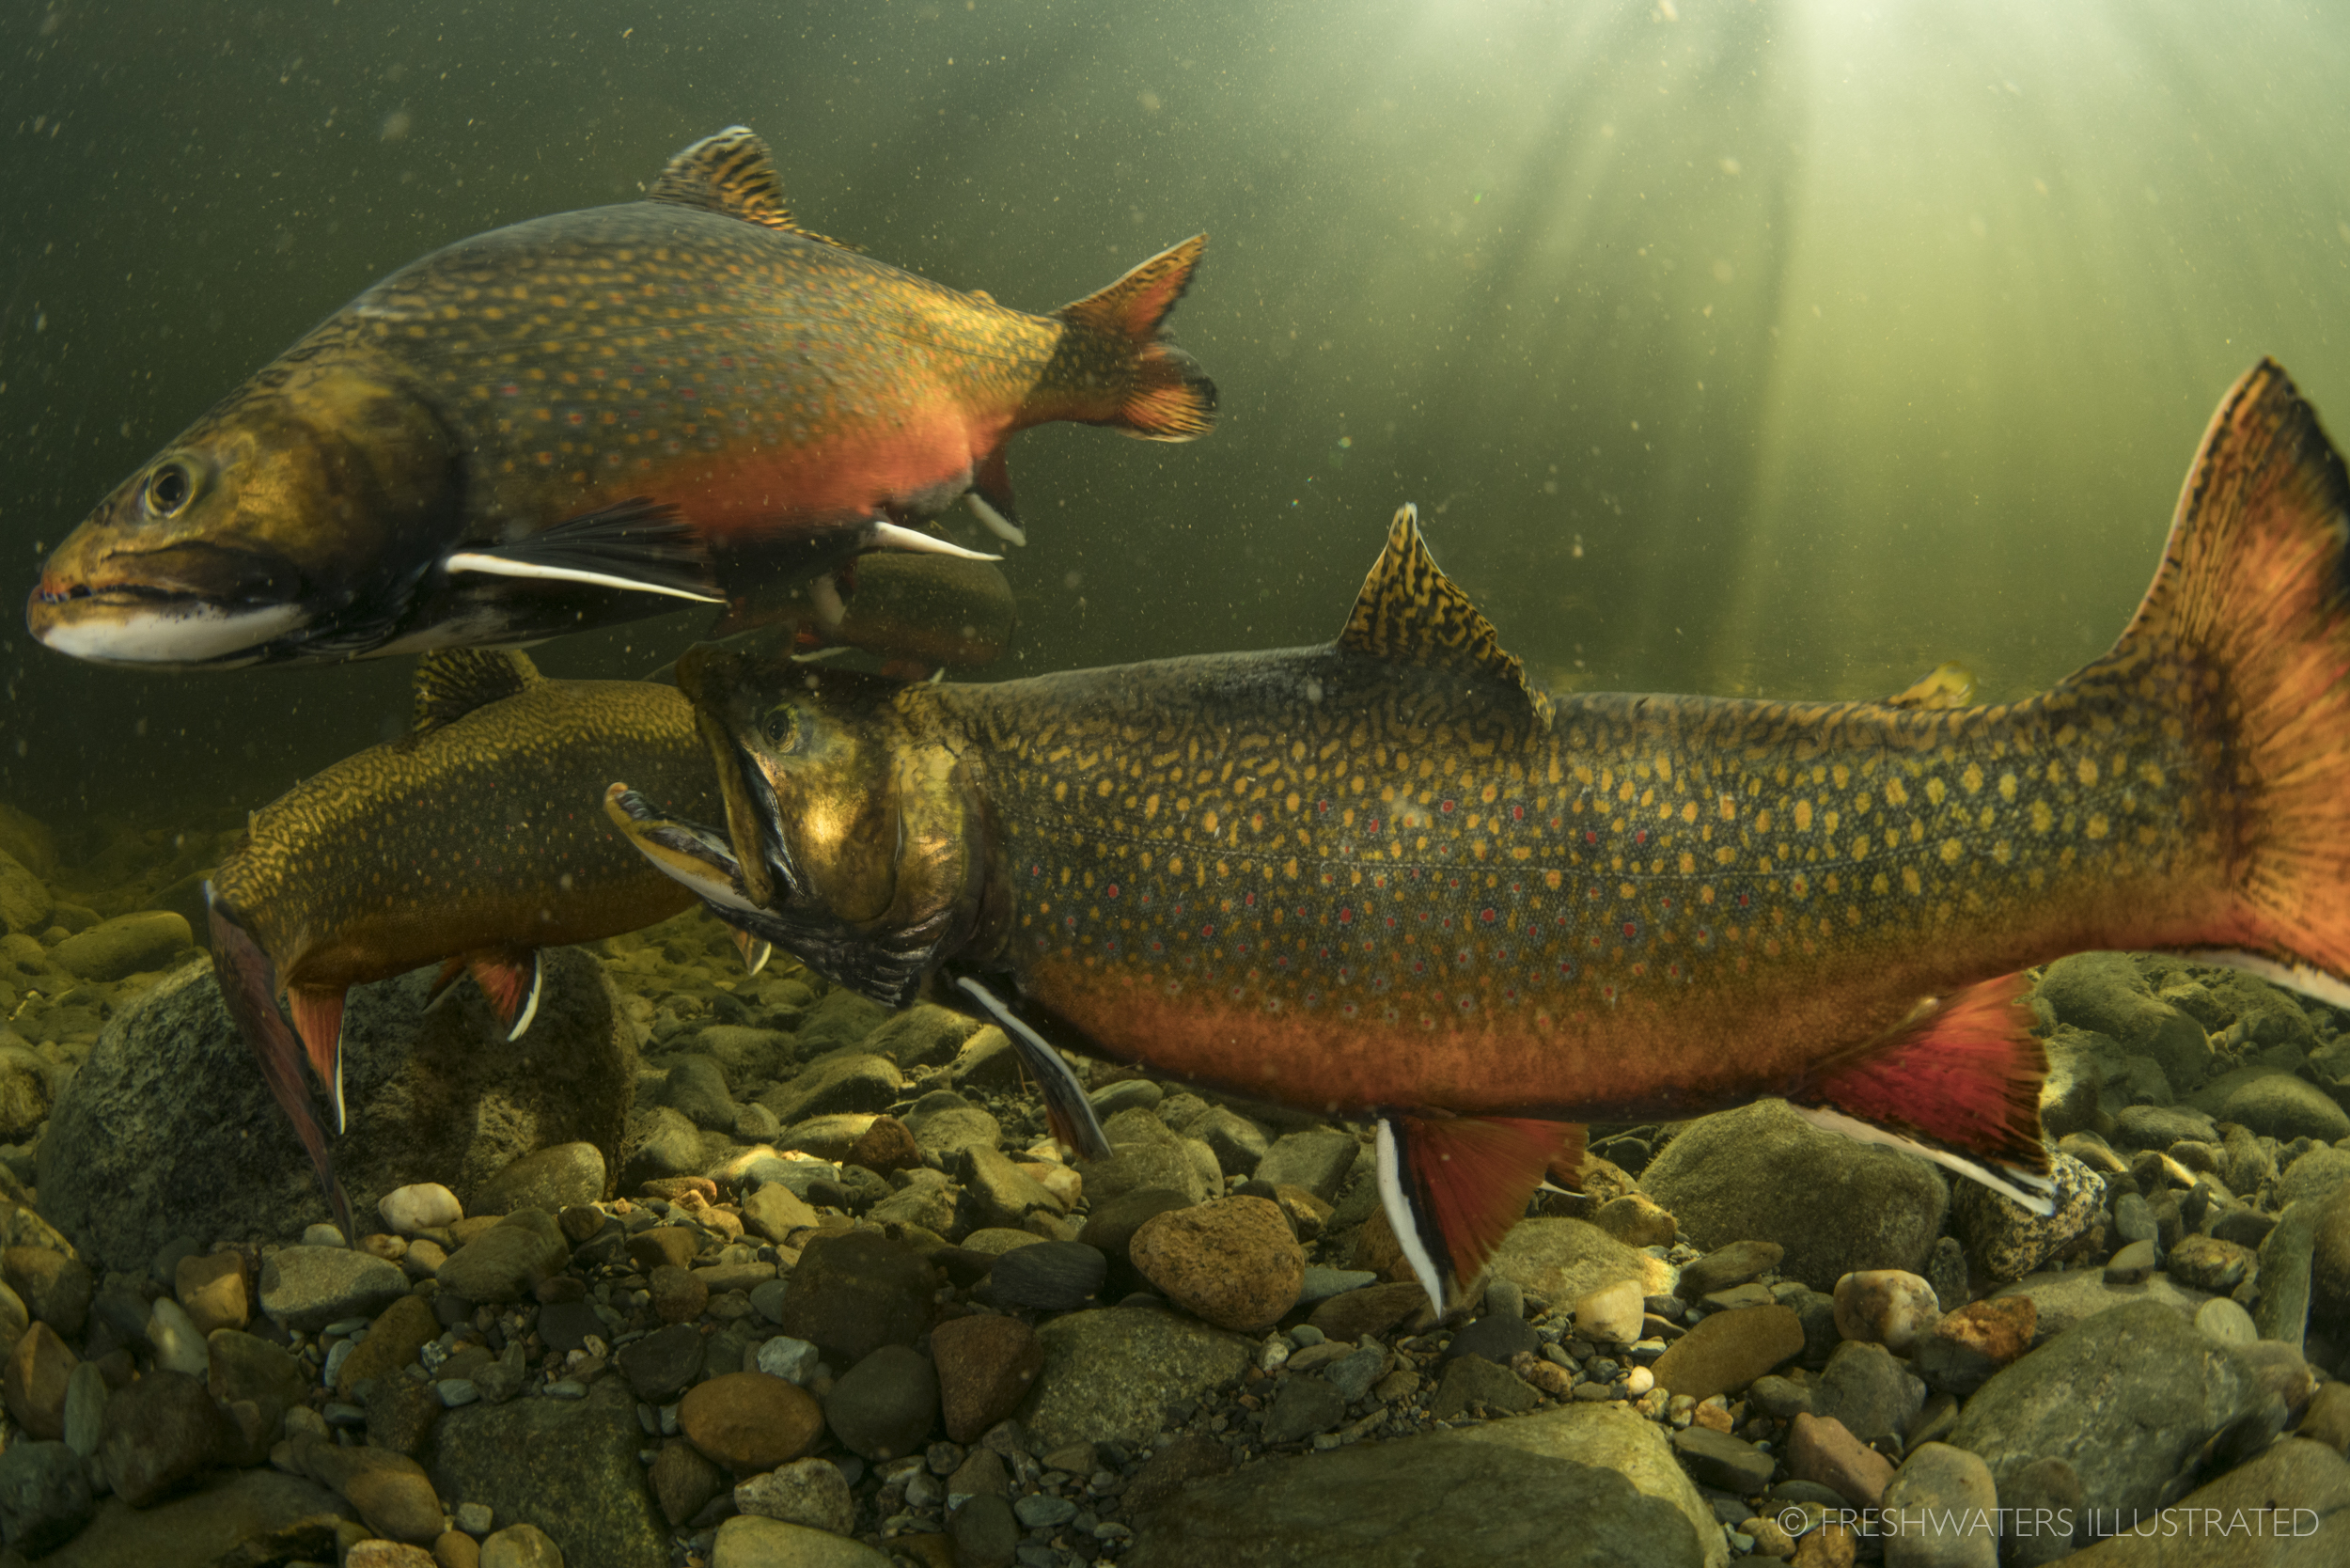  Two male Brook Trout (Salvelinus fontinalis) fight over the opportunity to spawn with a female. Magalloway River, Maine  www.FreshwatersIllustrated.org  